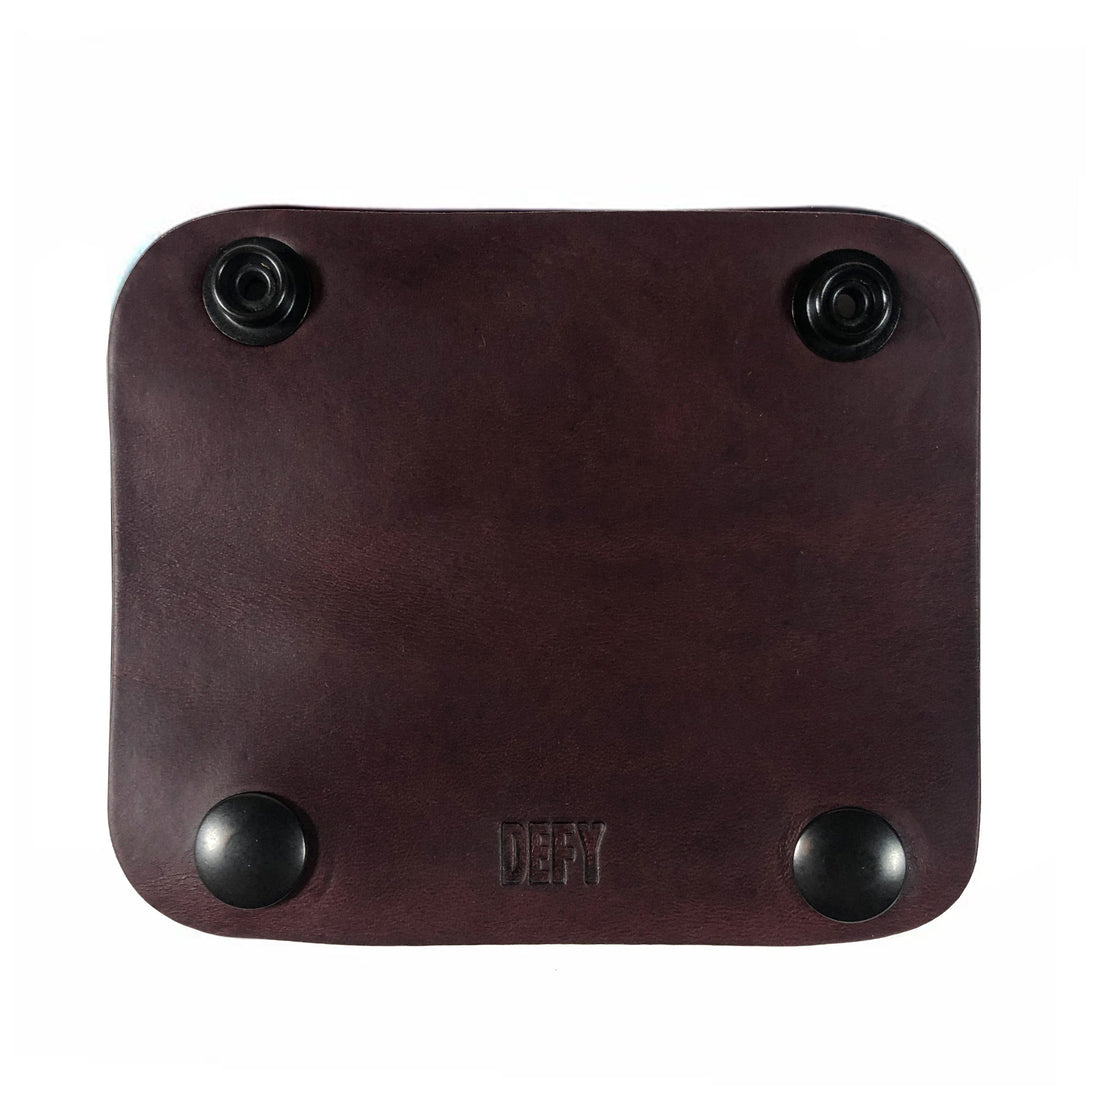 Mr. Gripper | Horween Leather